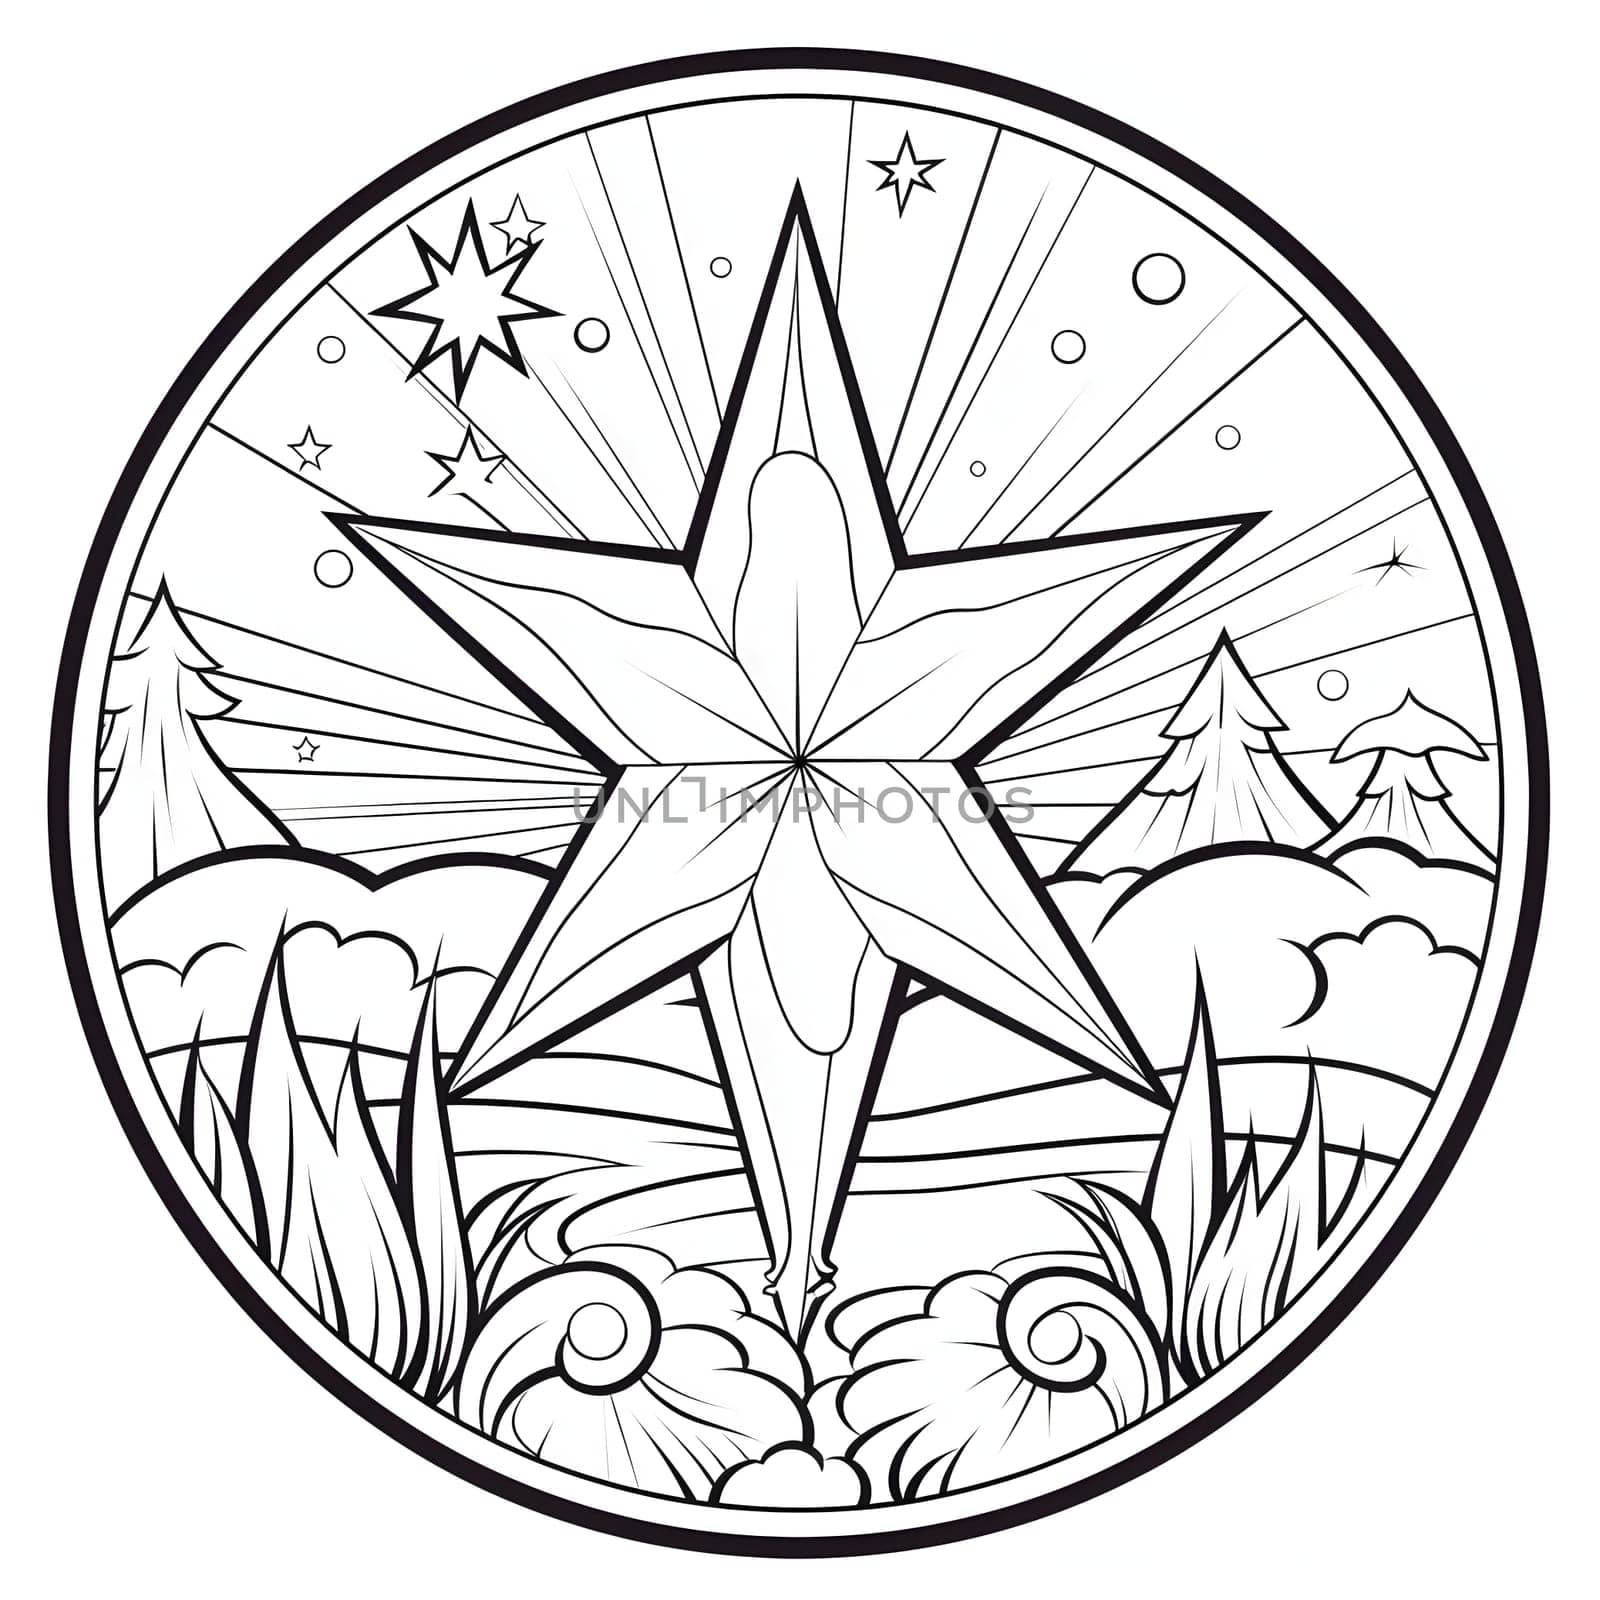 Black and White coloring page; star over a clearing in a circle. The Christmas star as a symbol of the birth of the savior. A Time of Joy and Celebration.